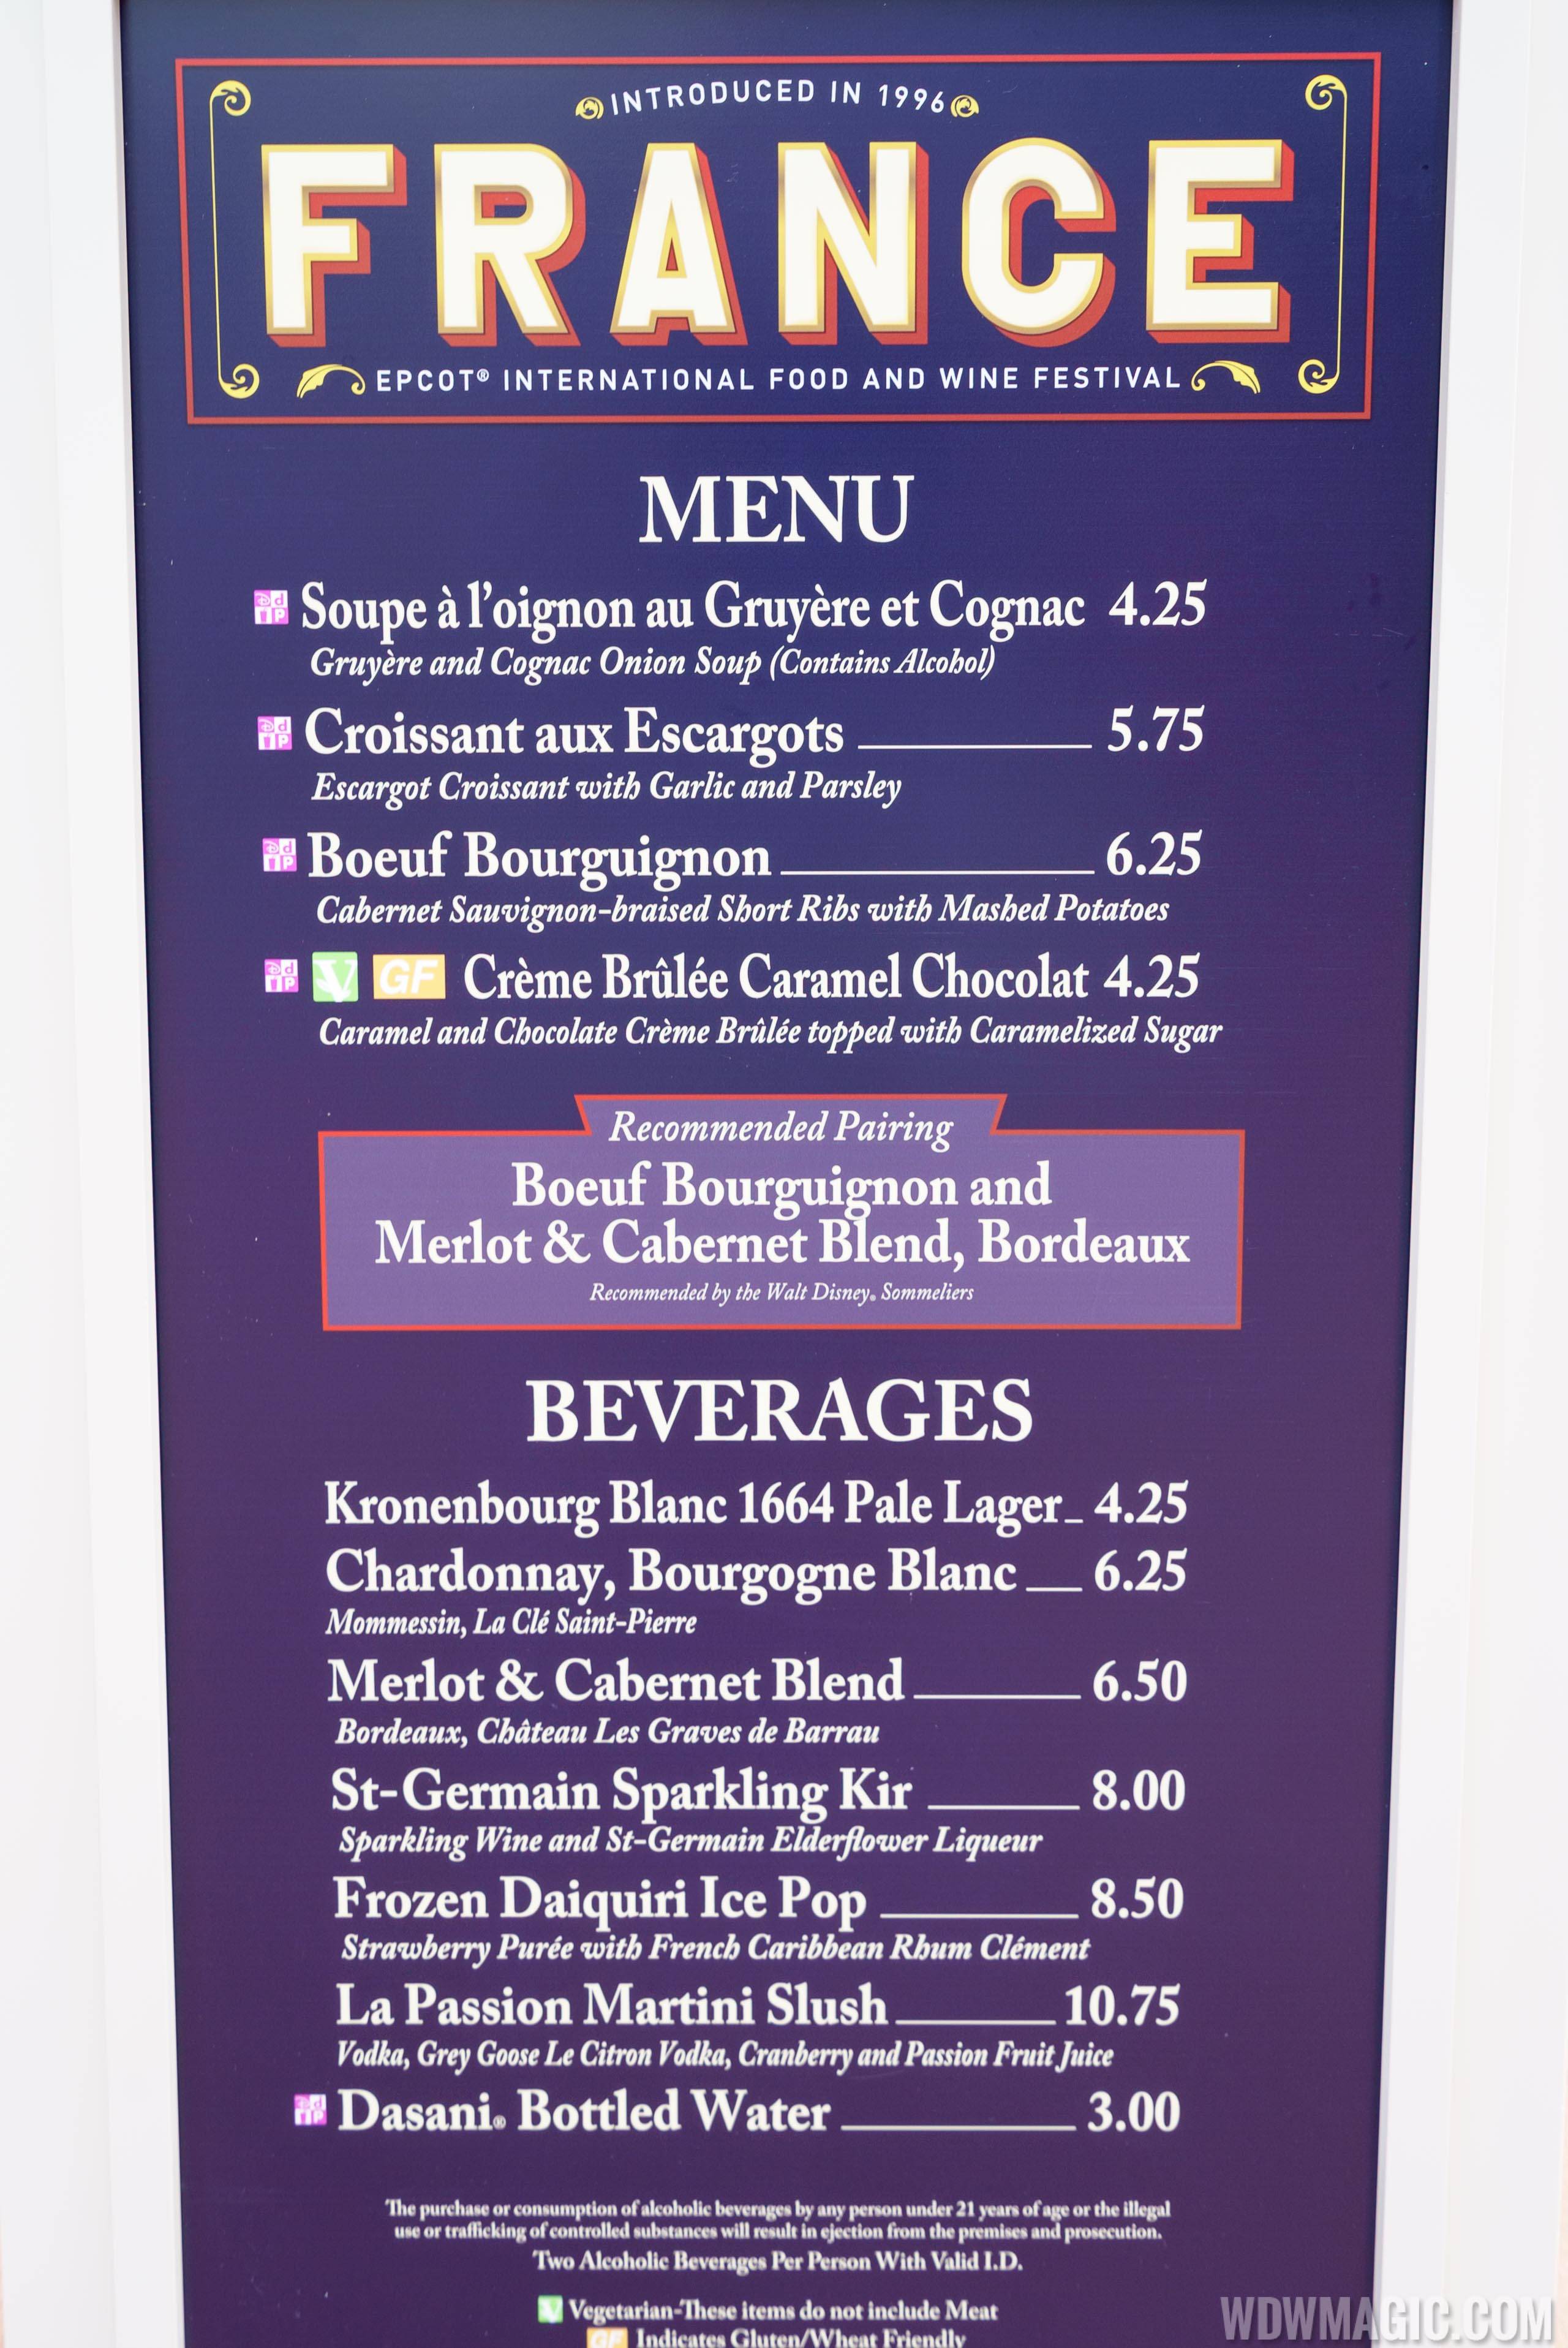 2016 Epcot Food and Wine Festival - France menu